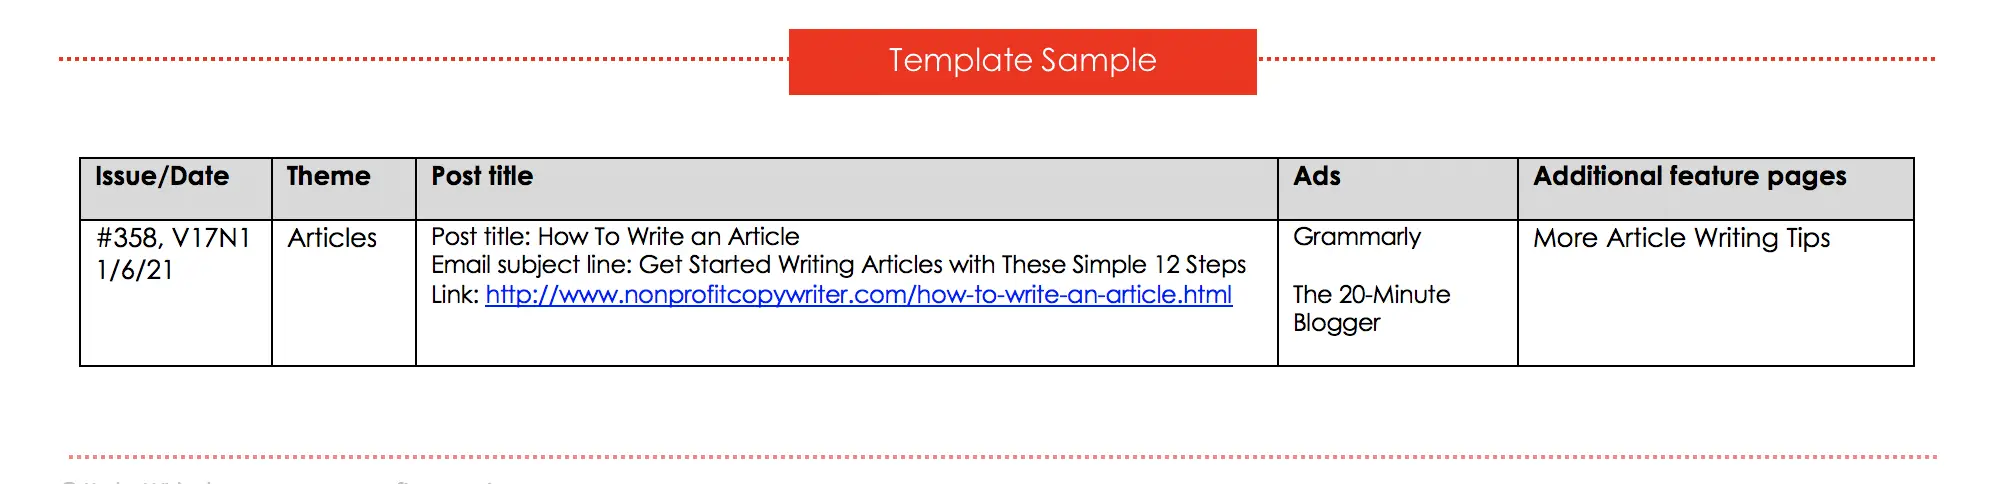 Simple content calendar sample with Word Wise at Nonprofit COpywriter #WritingTips #WritinResources